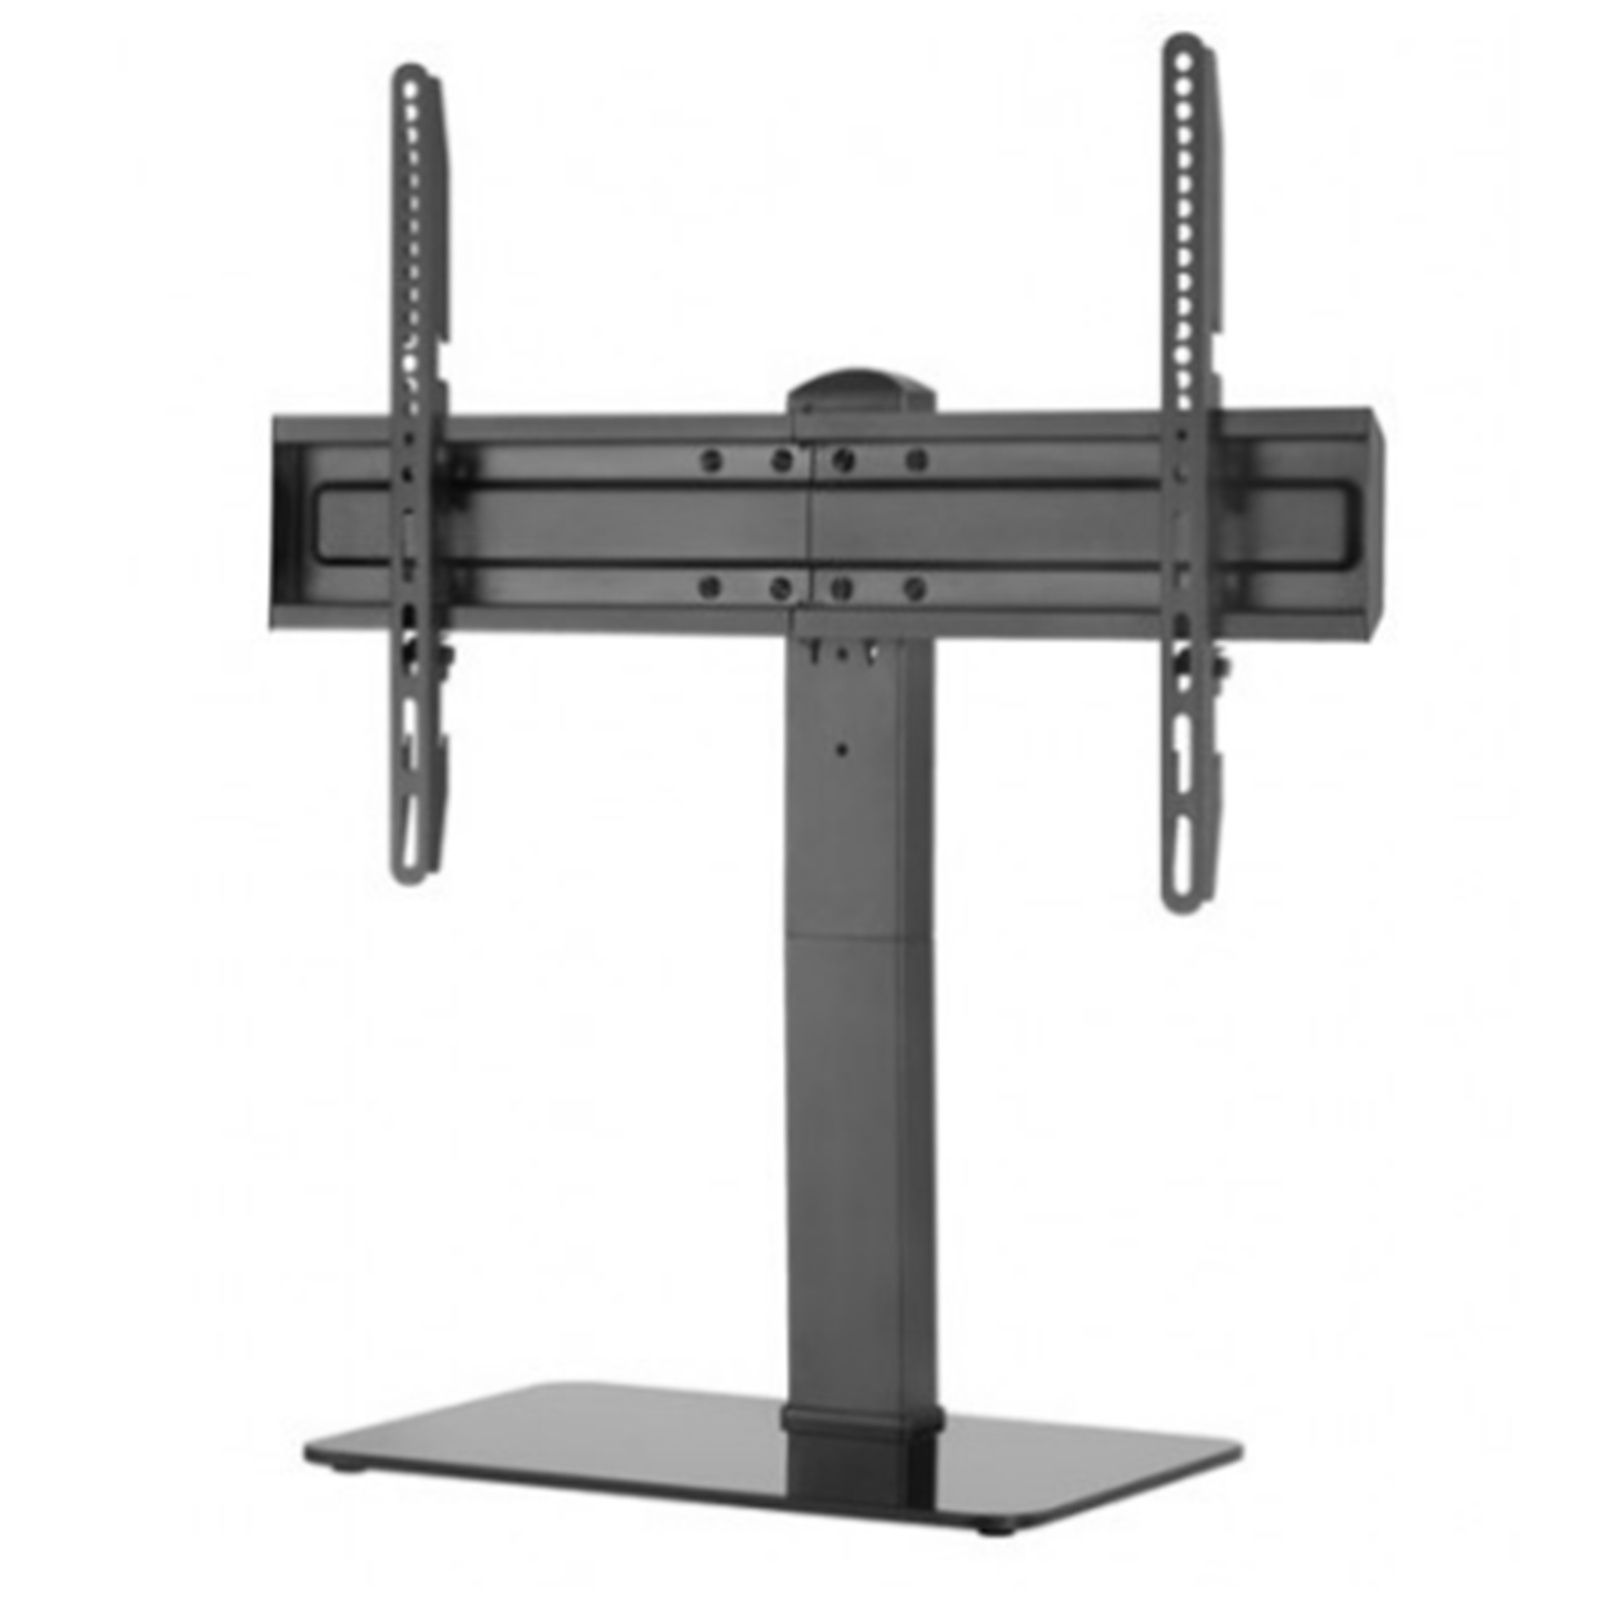 Buy The Omp M7446 Universal Tabletop Tv Stand Large 37 70 Vesa 400 ( M7446  ) Online – Pbtech.co.nz With Regard To Universal Tabletop Tv Stands (Photo 2 of 15)